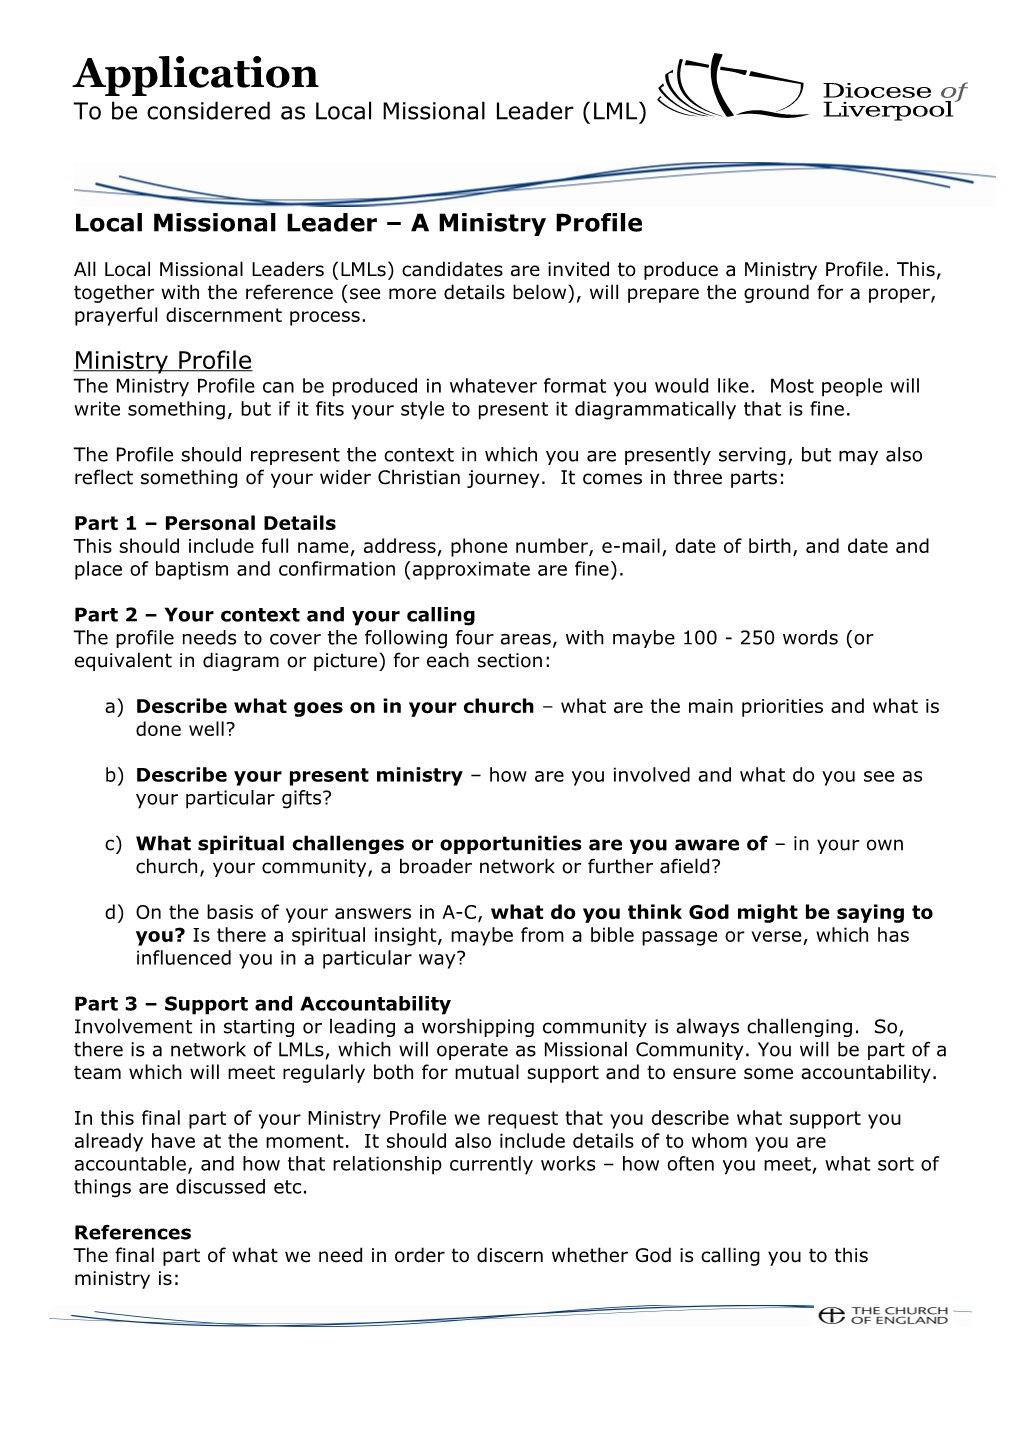 Local Missional Leader a Ministry Profile